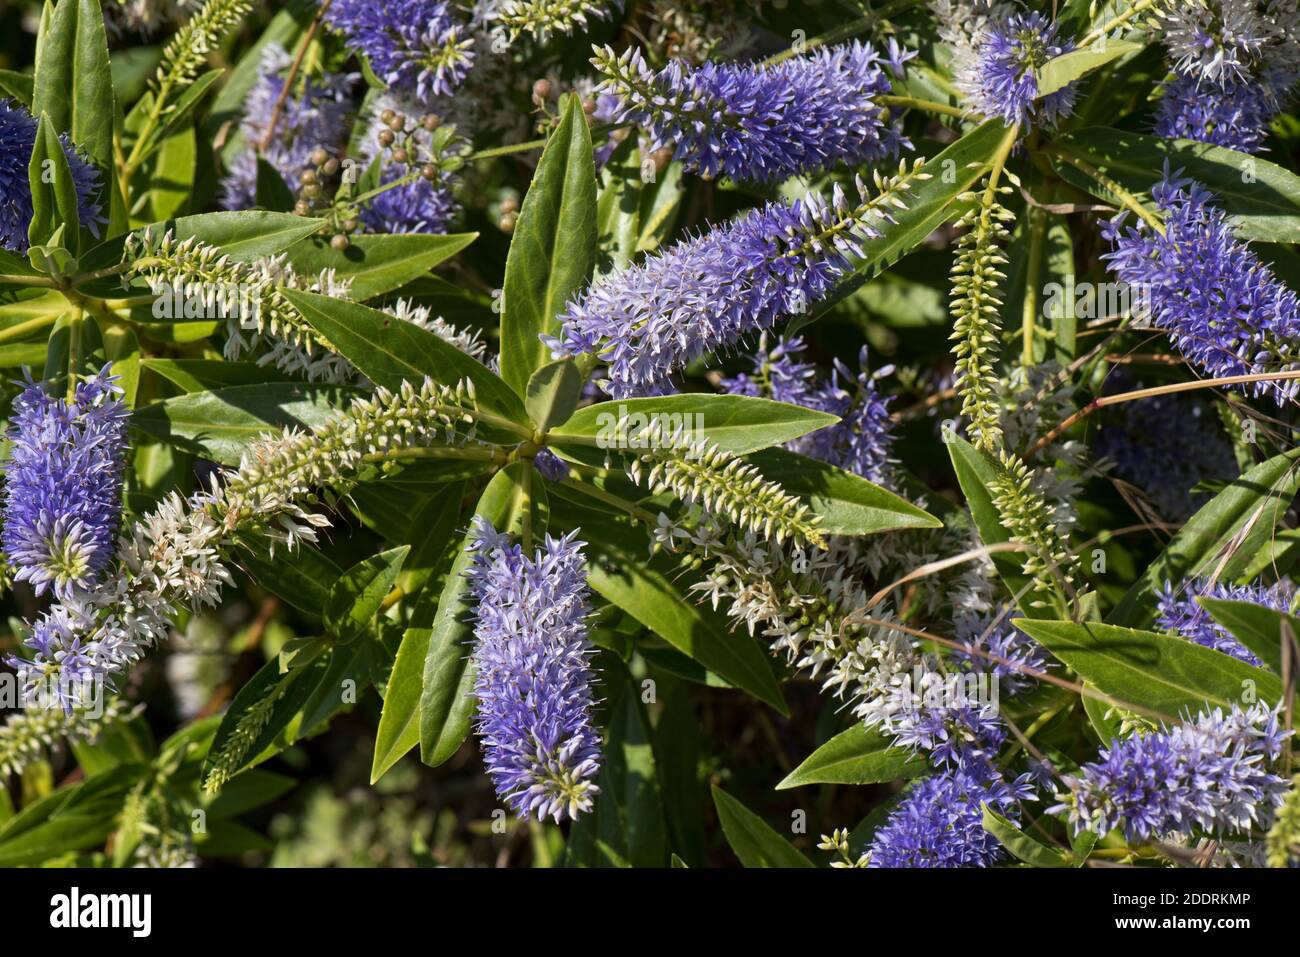 Spiked inflorescences of flowers on Hebe 'Midsummer Beauty' blue aging to white a garden shrub with shiny lanceolate leaves, Berkshire, June Stock Photo